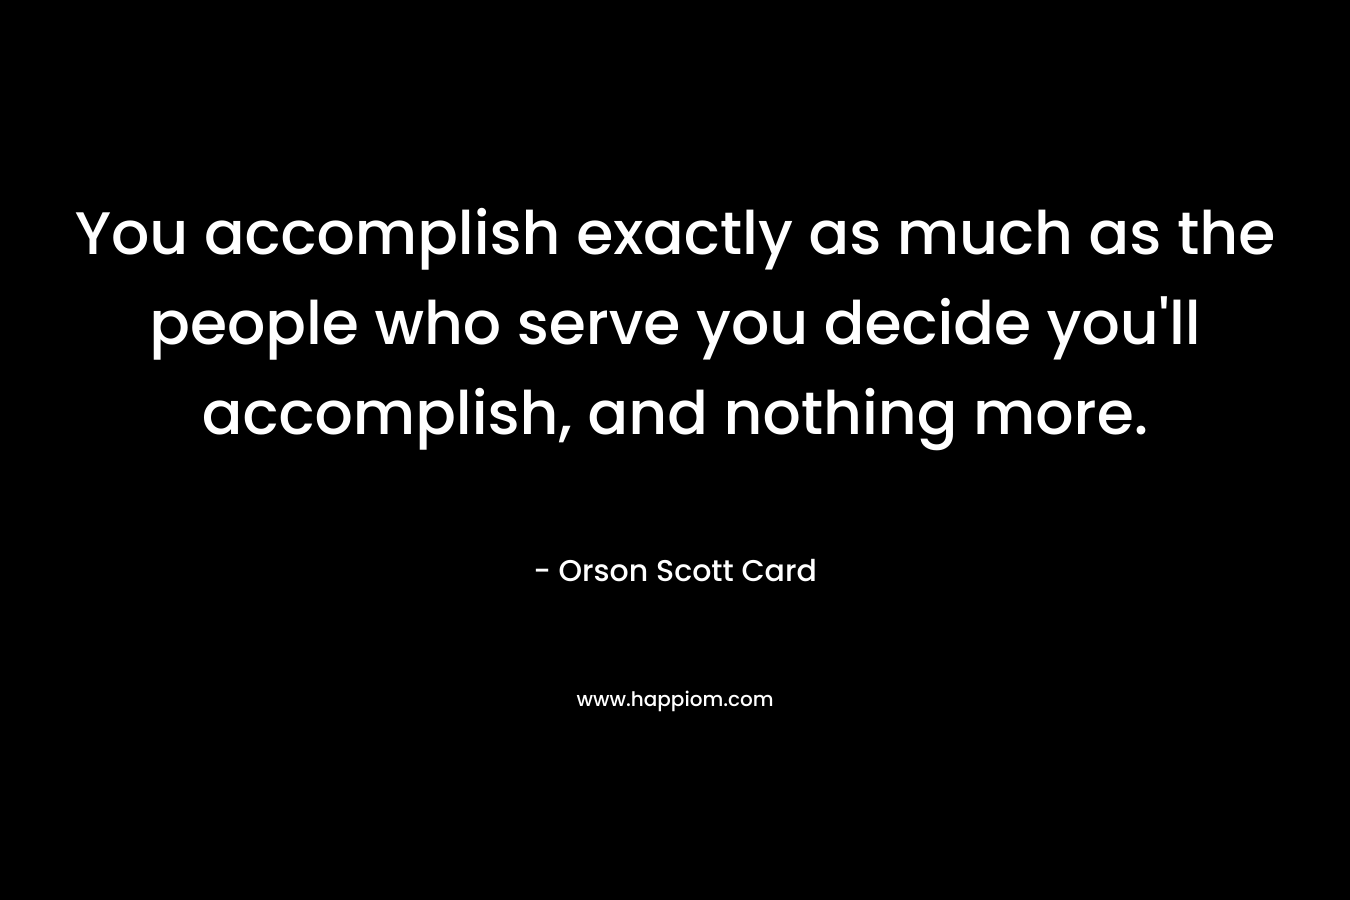 You accomplish exactly as much as the people who serve you decide you'll accomplish, and nothing more.